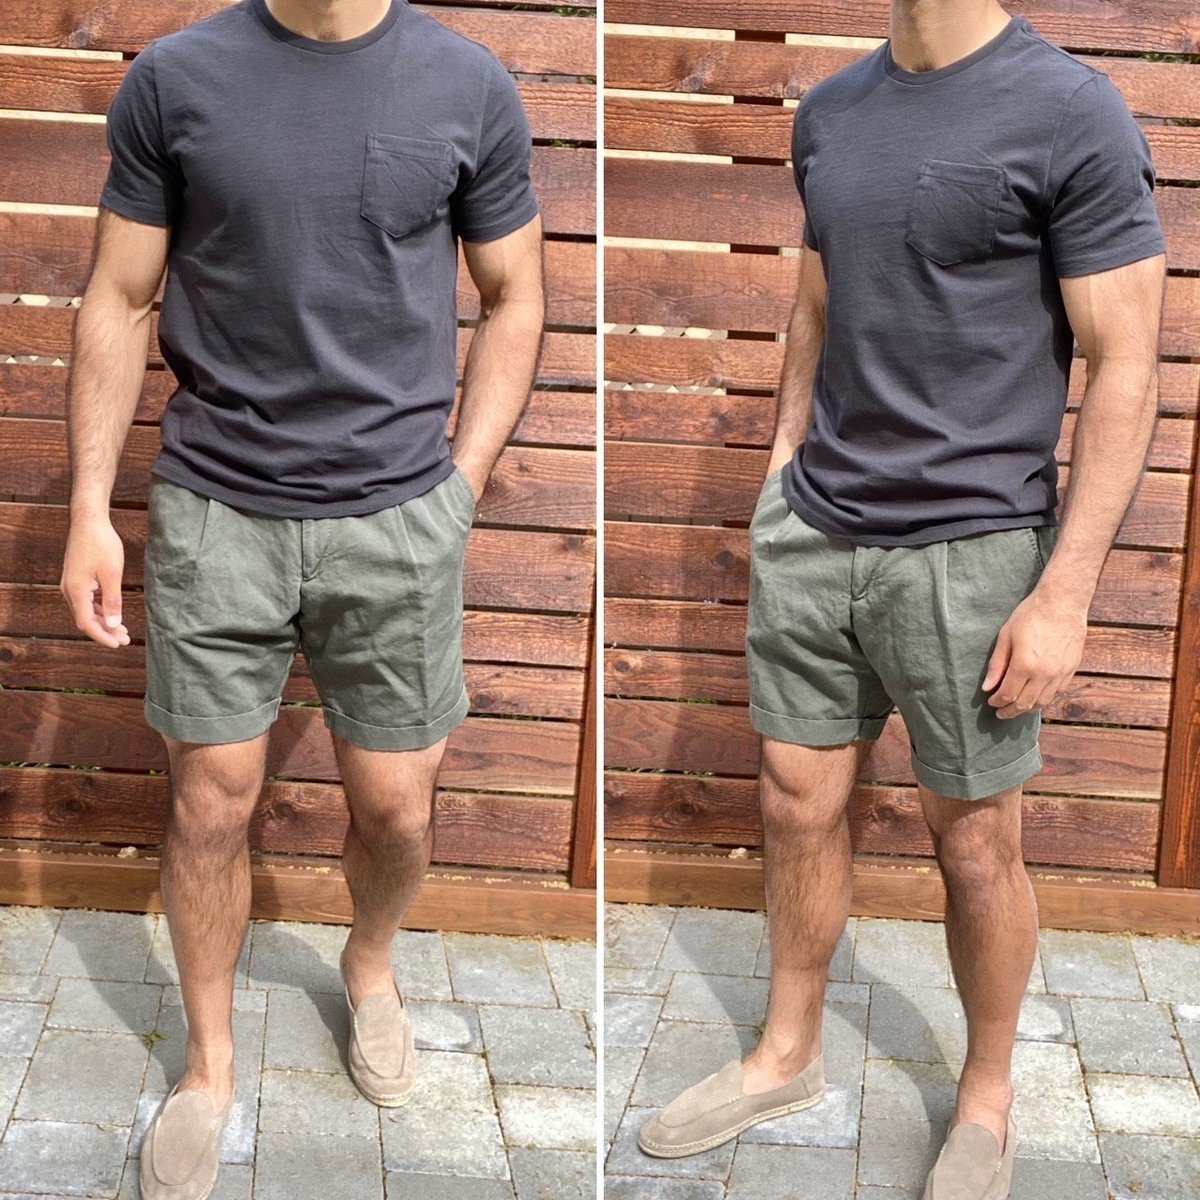 Not too many guys are up on the pleated shorts. I picked up a pair from Suit Supply a couple of seasons ago which are in linen. 

Paired here with some espadrilles and a plain black t-shirt. 

Worth giving pleated shorts a shot. Love the look of these.